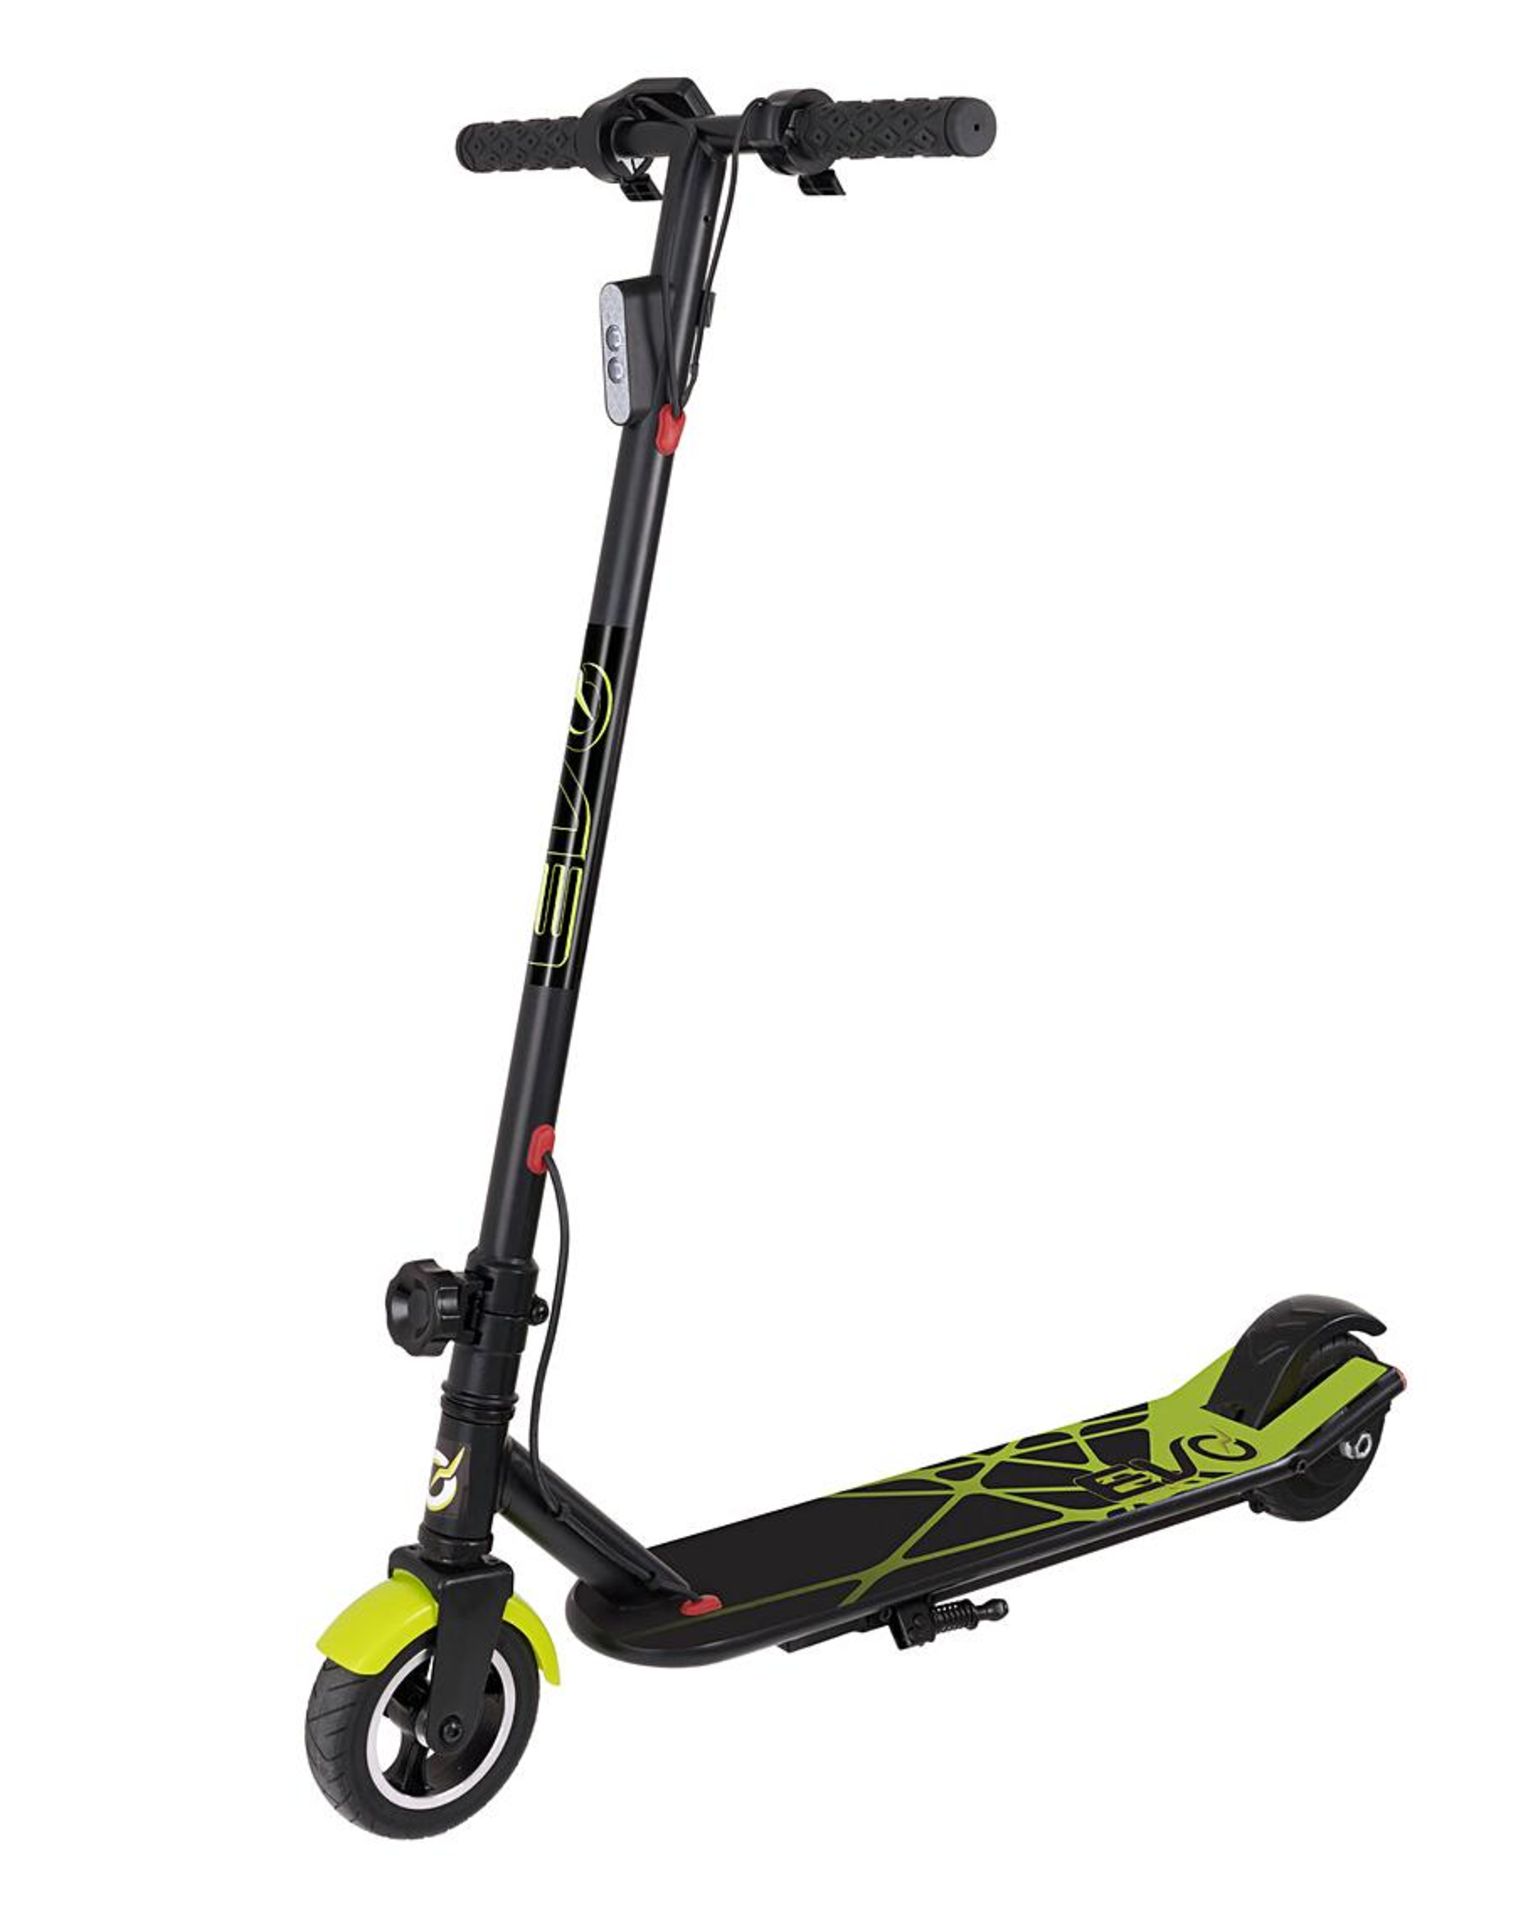 (REF118383) EVO VT3 RRP 299.99. The VT3 lithium electric scooter operates with an induction start